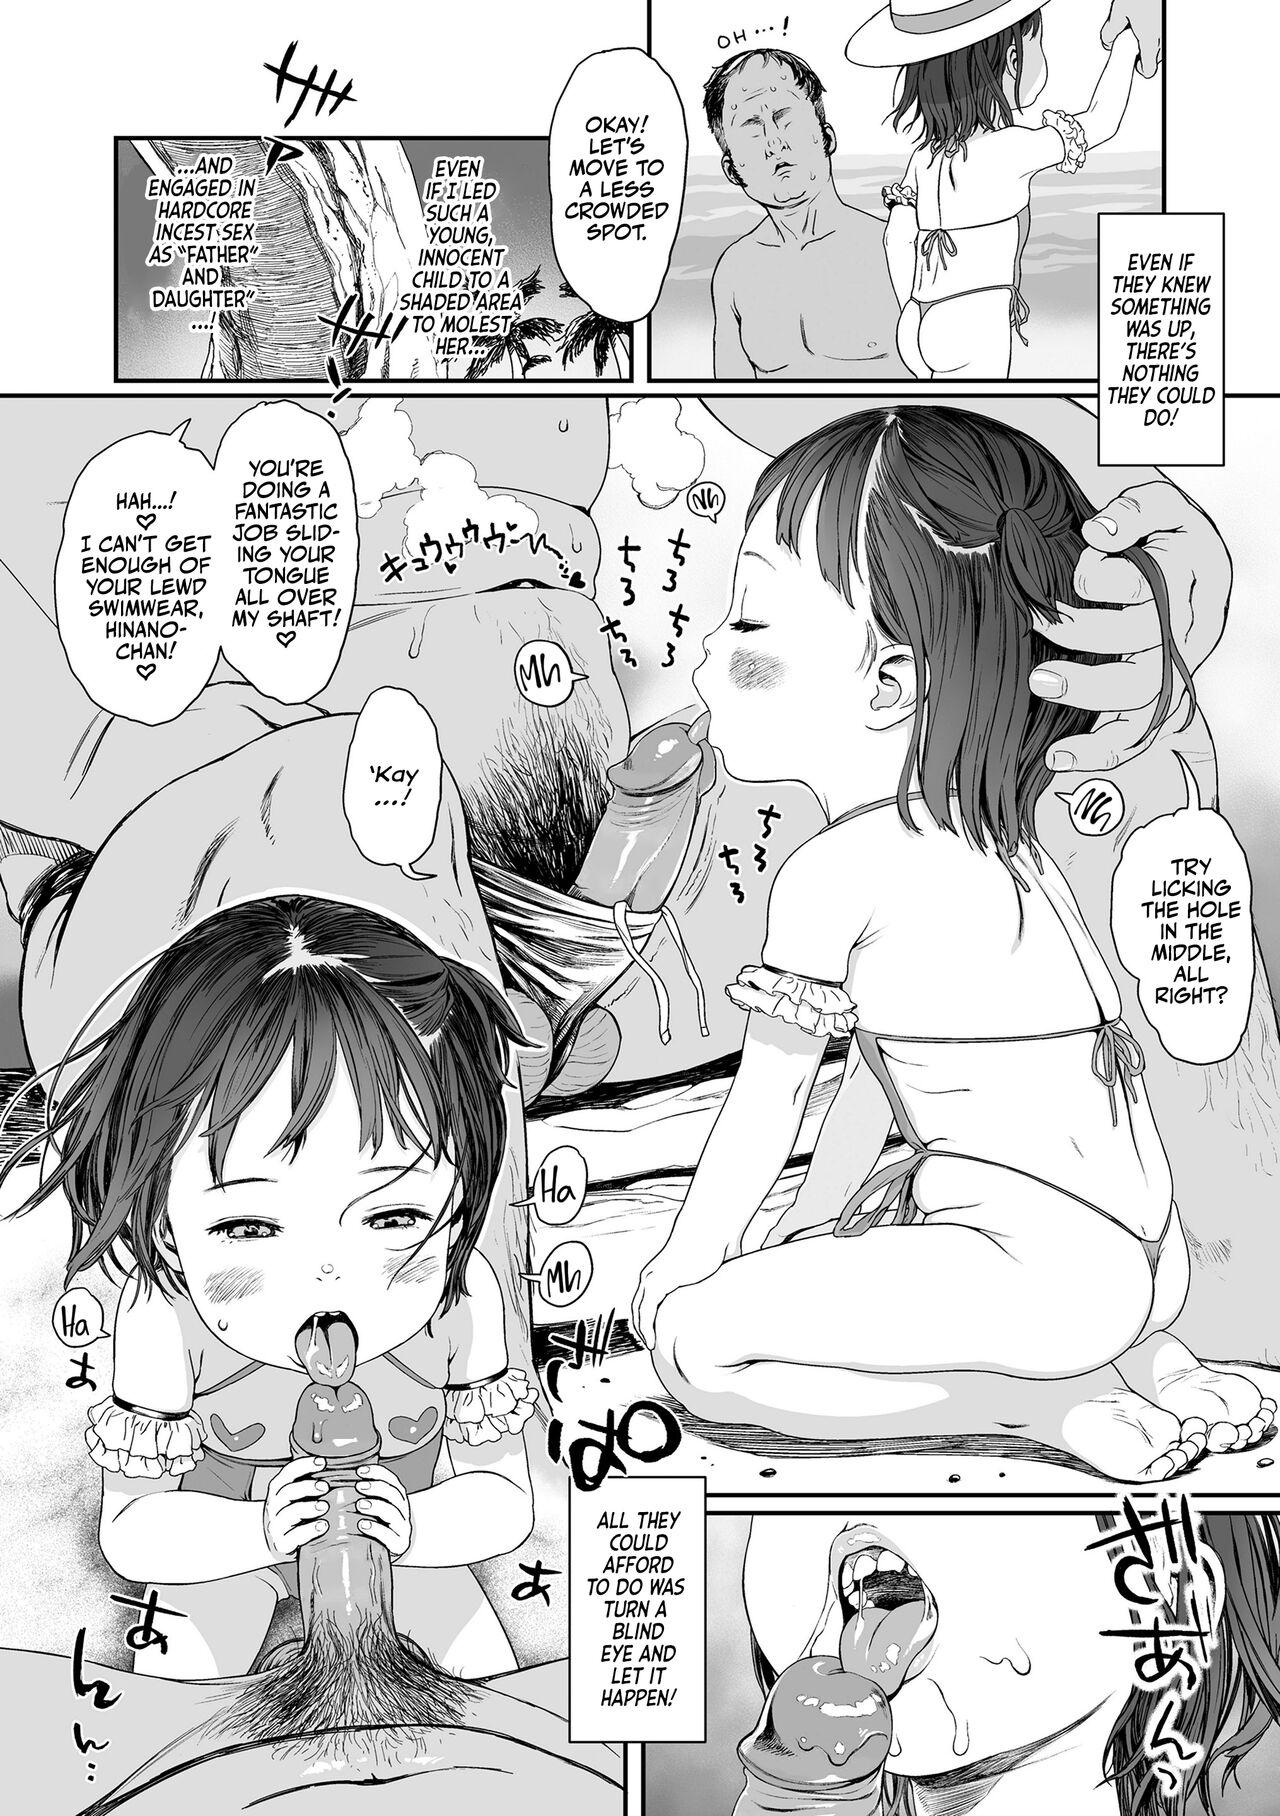 Gaygroupsex Minami no Kuni de Hina wo Tobasete | Hina in the Sky of a Country from the South! Black Woman - Page 2